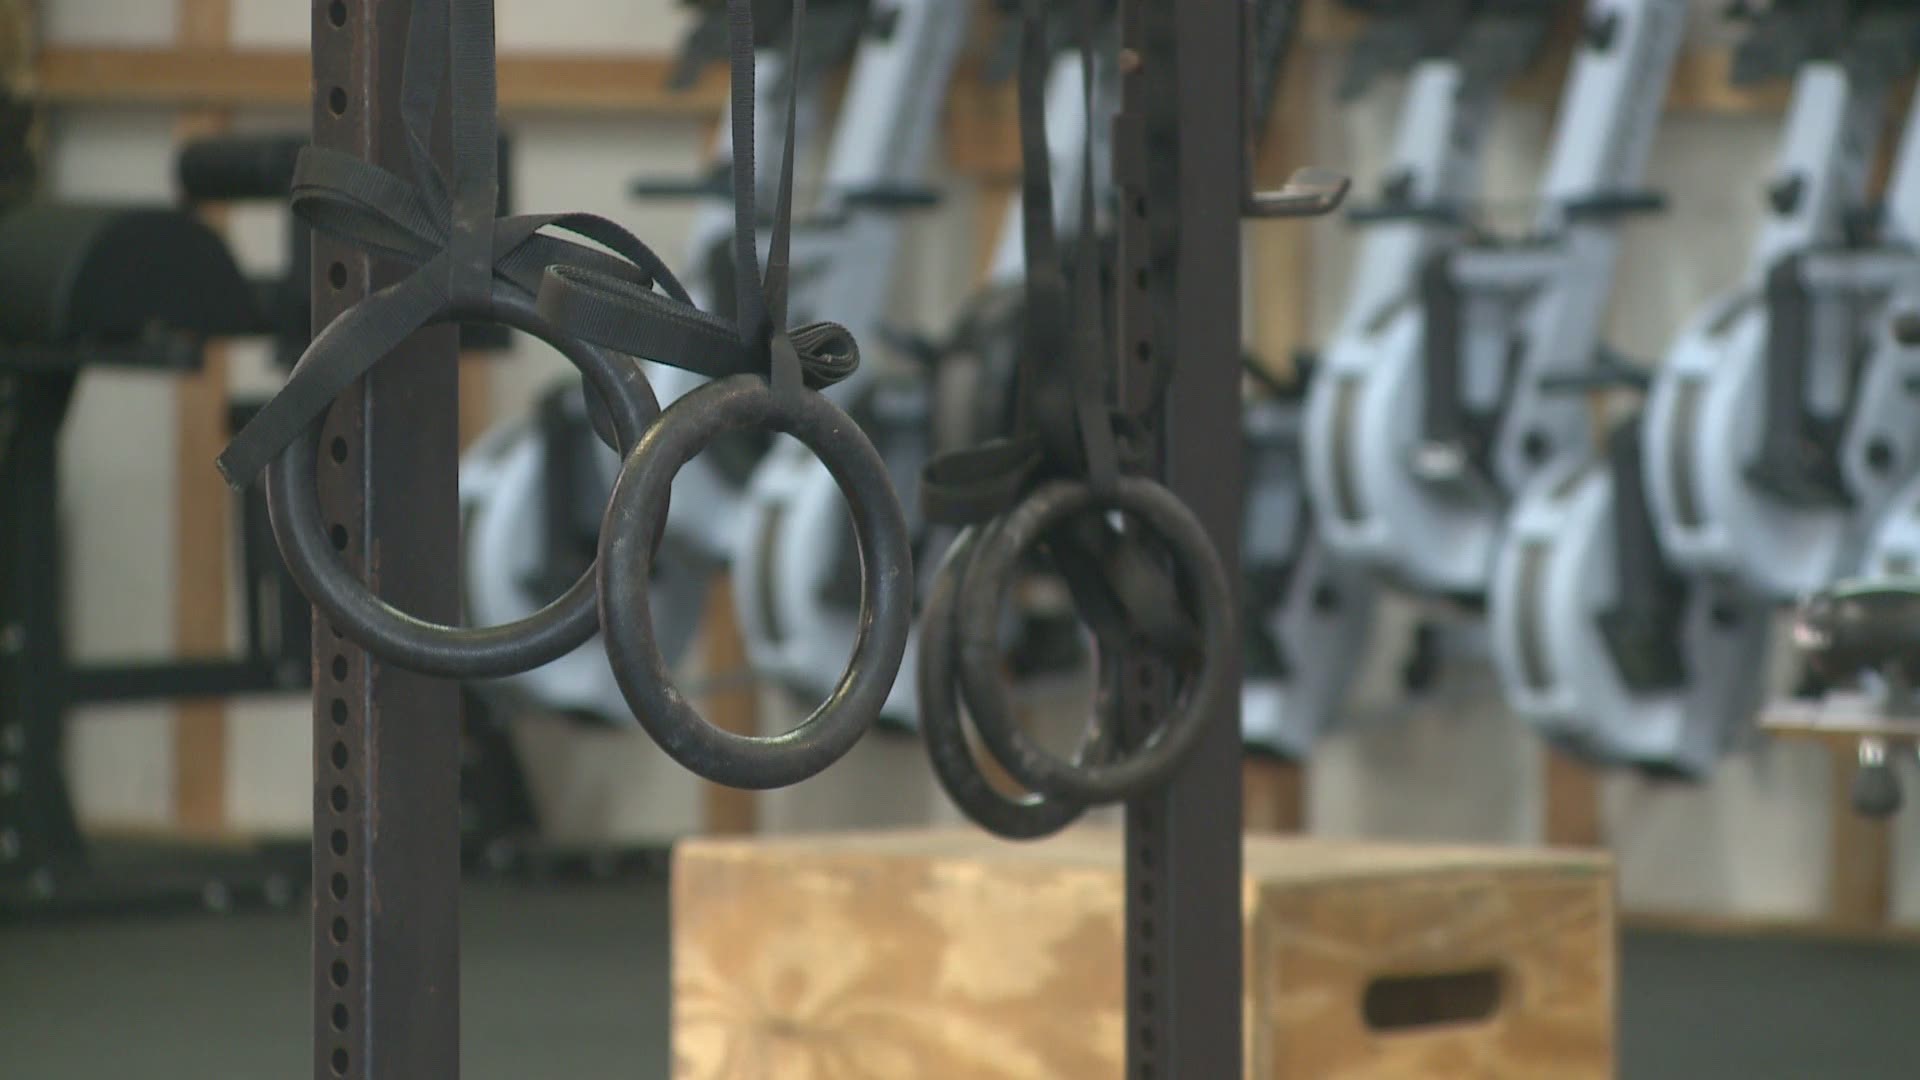 Some local gyms say they are ready to go while others are concerned the regulations in place could be overly restricting.